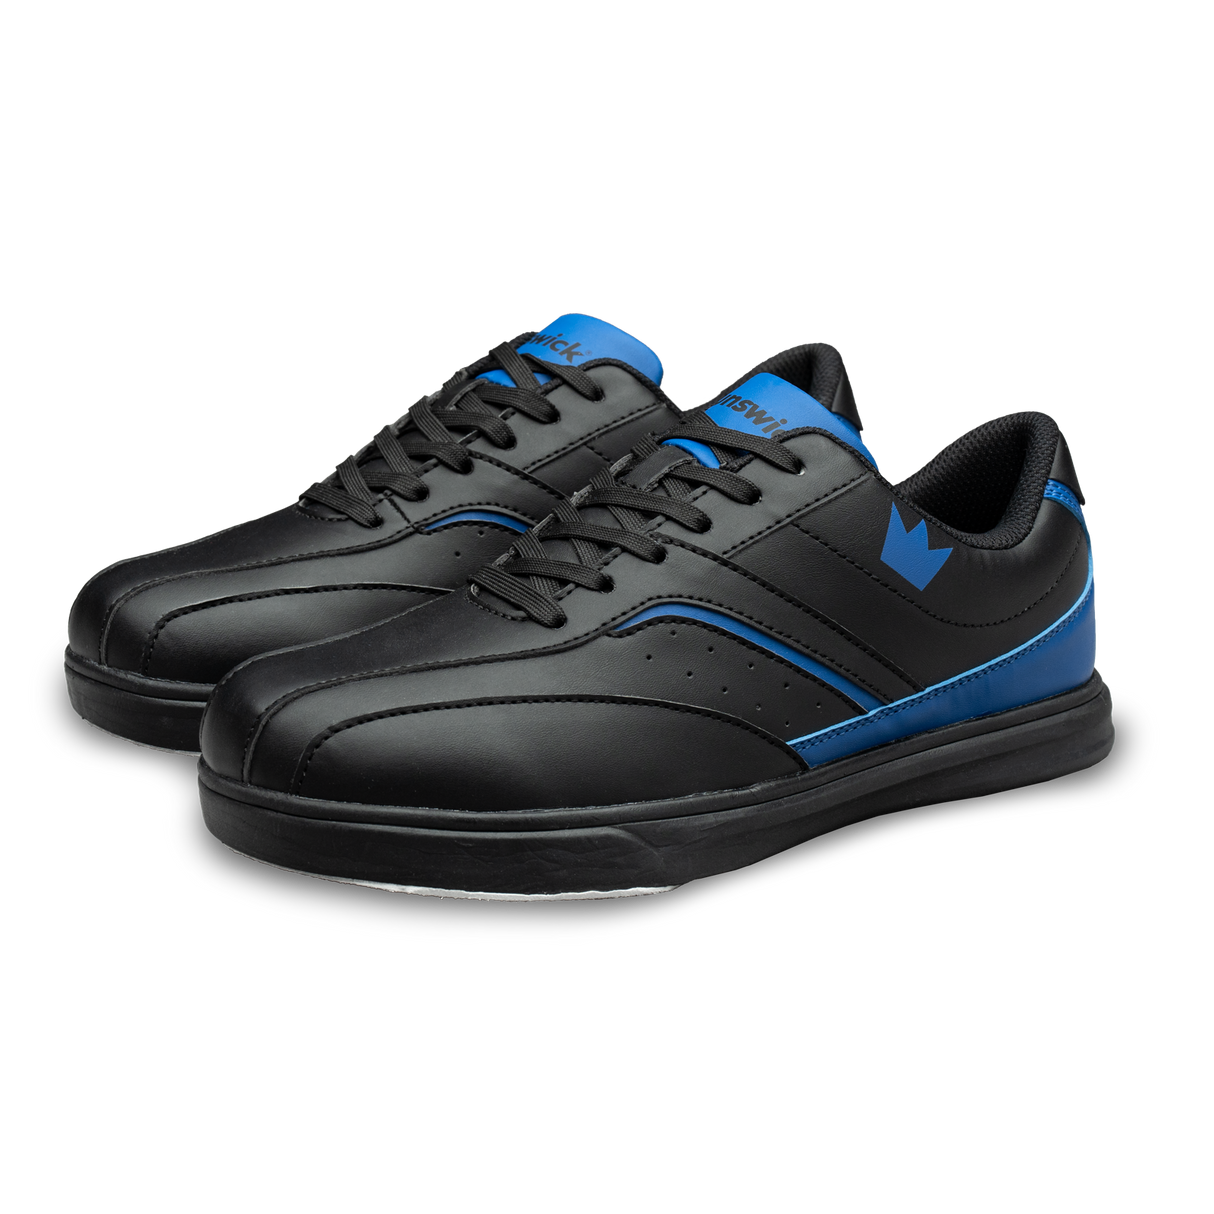 Brunswick Vapor Black/Royal Bowling Shoes * Performance synthetic uppers * Foam padded collar and tongue * Extra-light molded EVA outsole * Pure slide microfiber slide soles on both shoes * Superior slide immediately *  * 